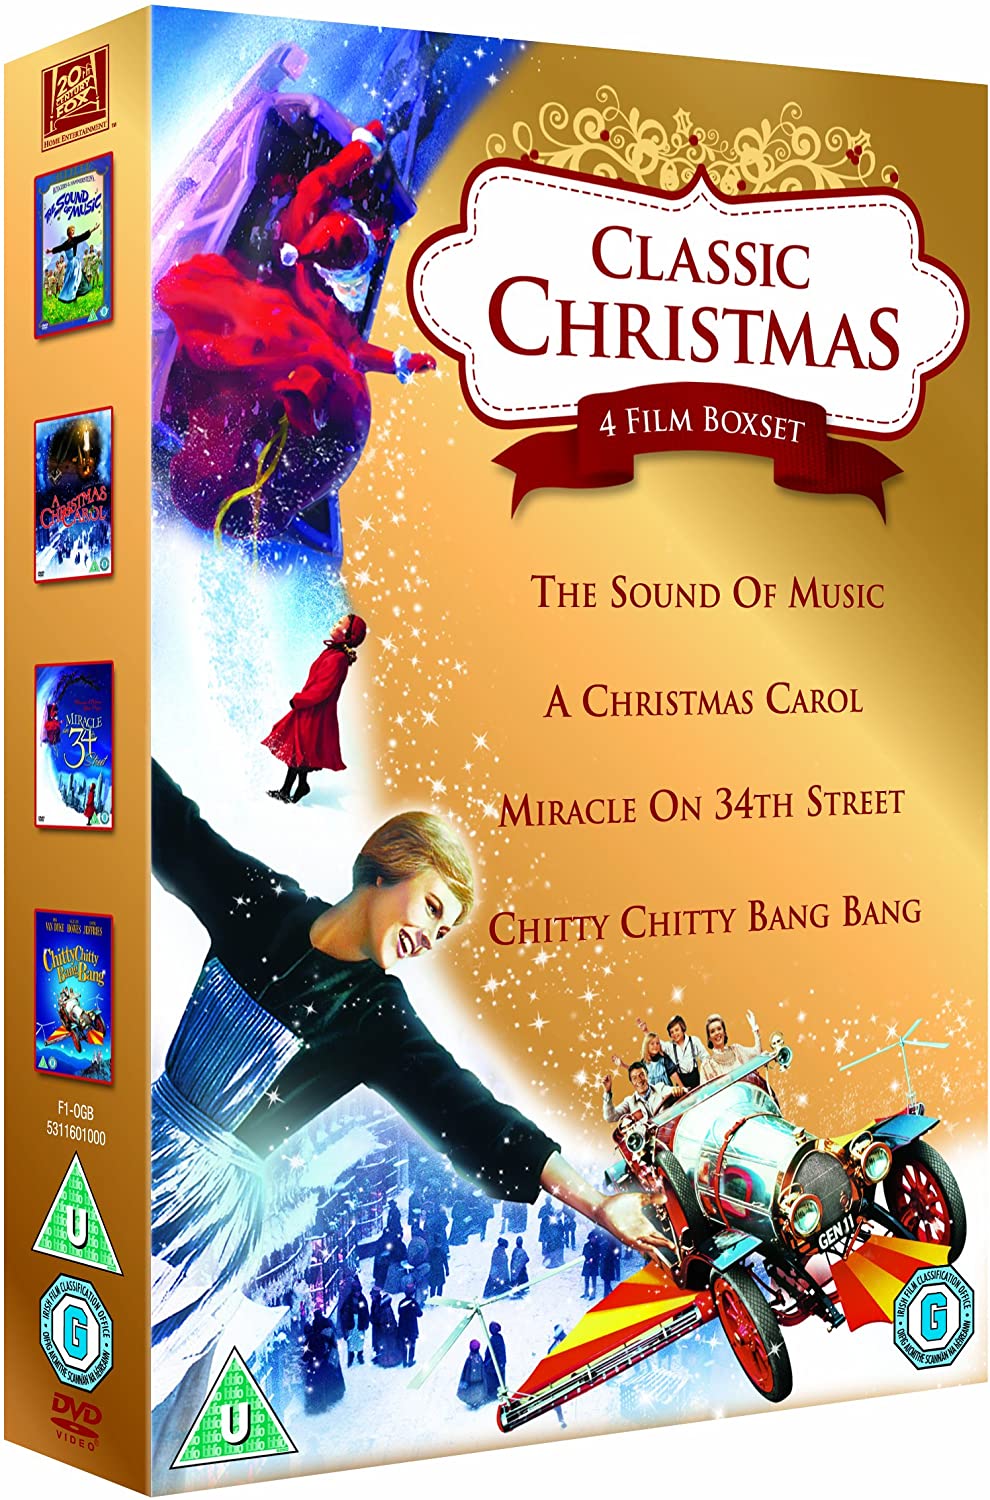 Classic Christmas 4 Film Collection: The Sound of Music, A Christmas Carol, Miracle on 34th Street & Chitty Chitty Bang Bang [1965] [DVD]